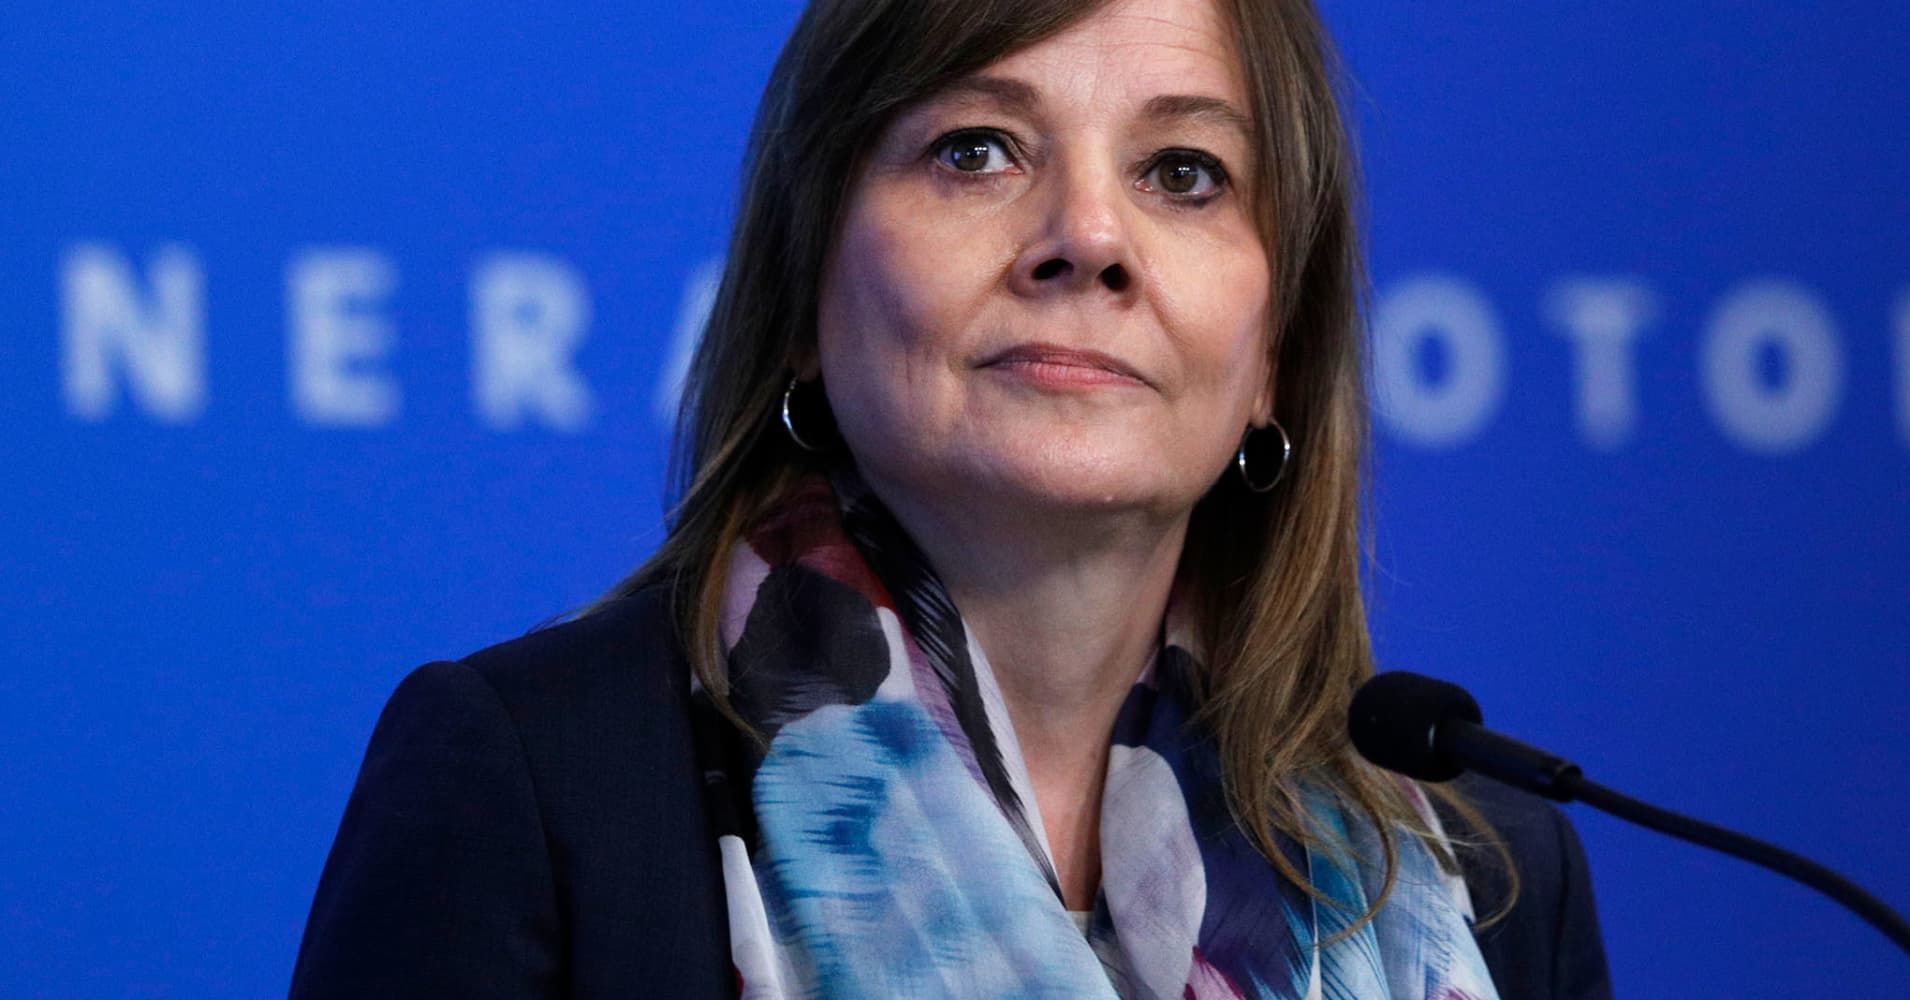 General Motors reports earnings before the bell — here's what the Street expects